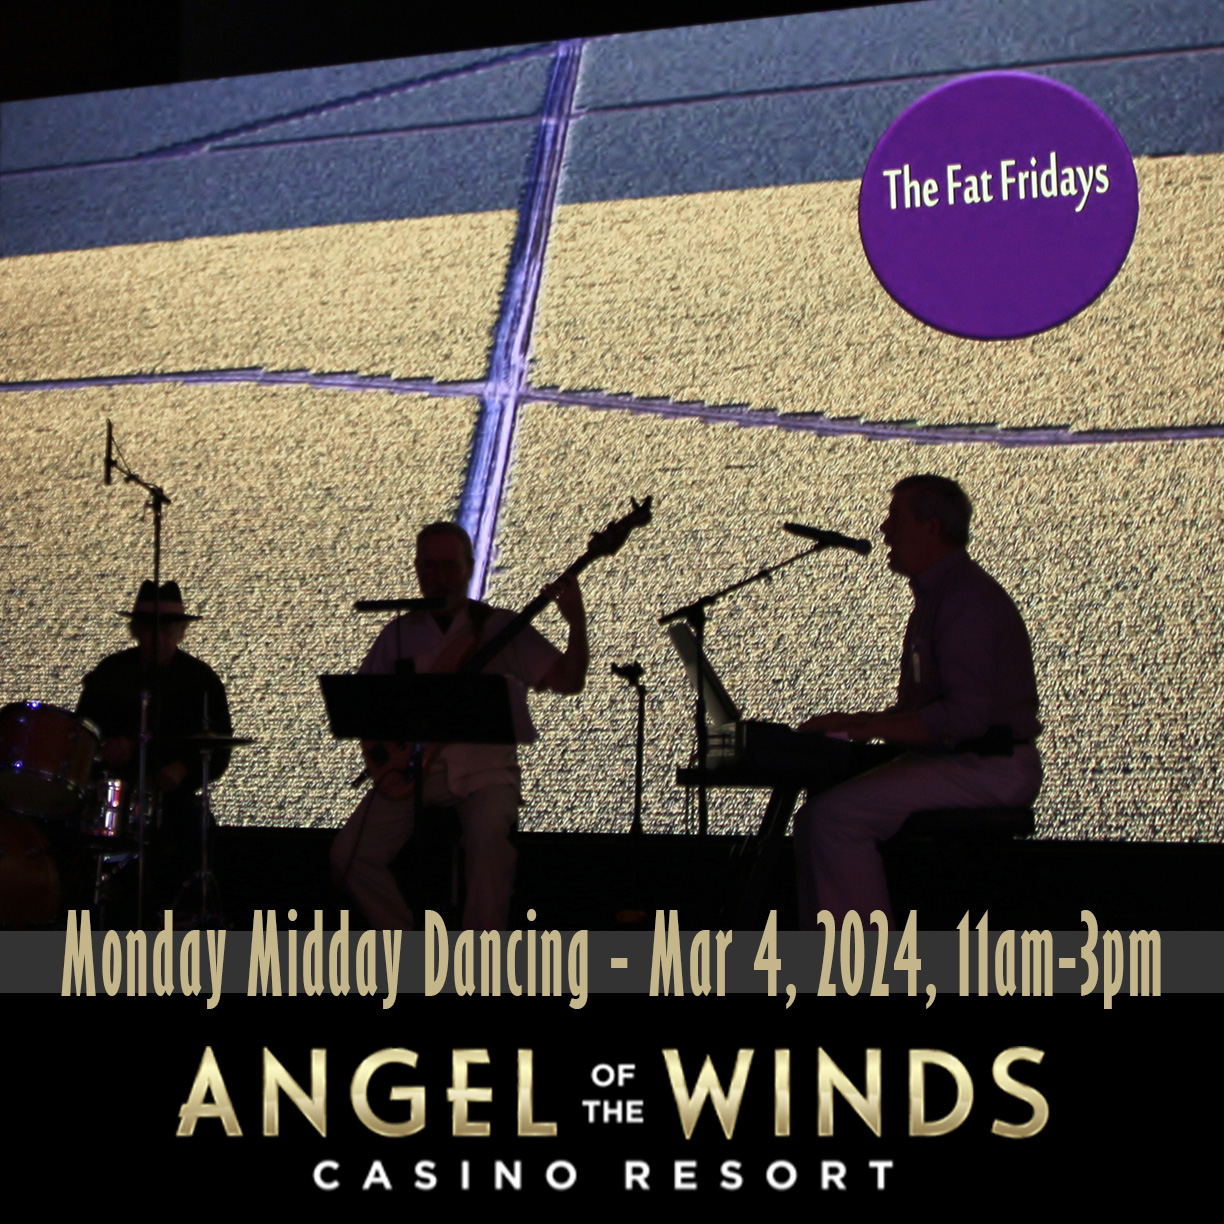 The Fat Fridays at Angel of the Winds casino